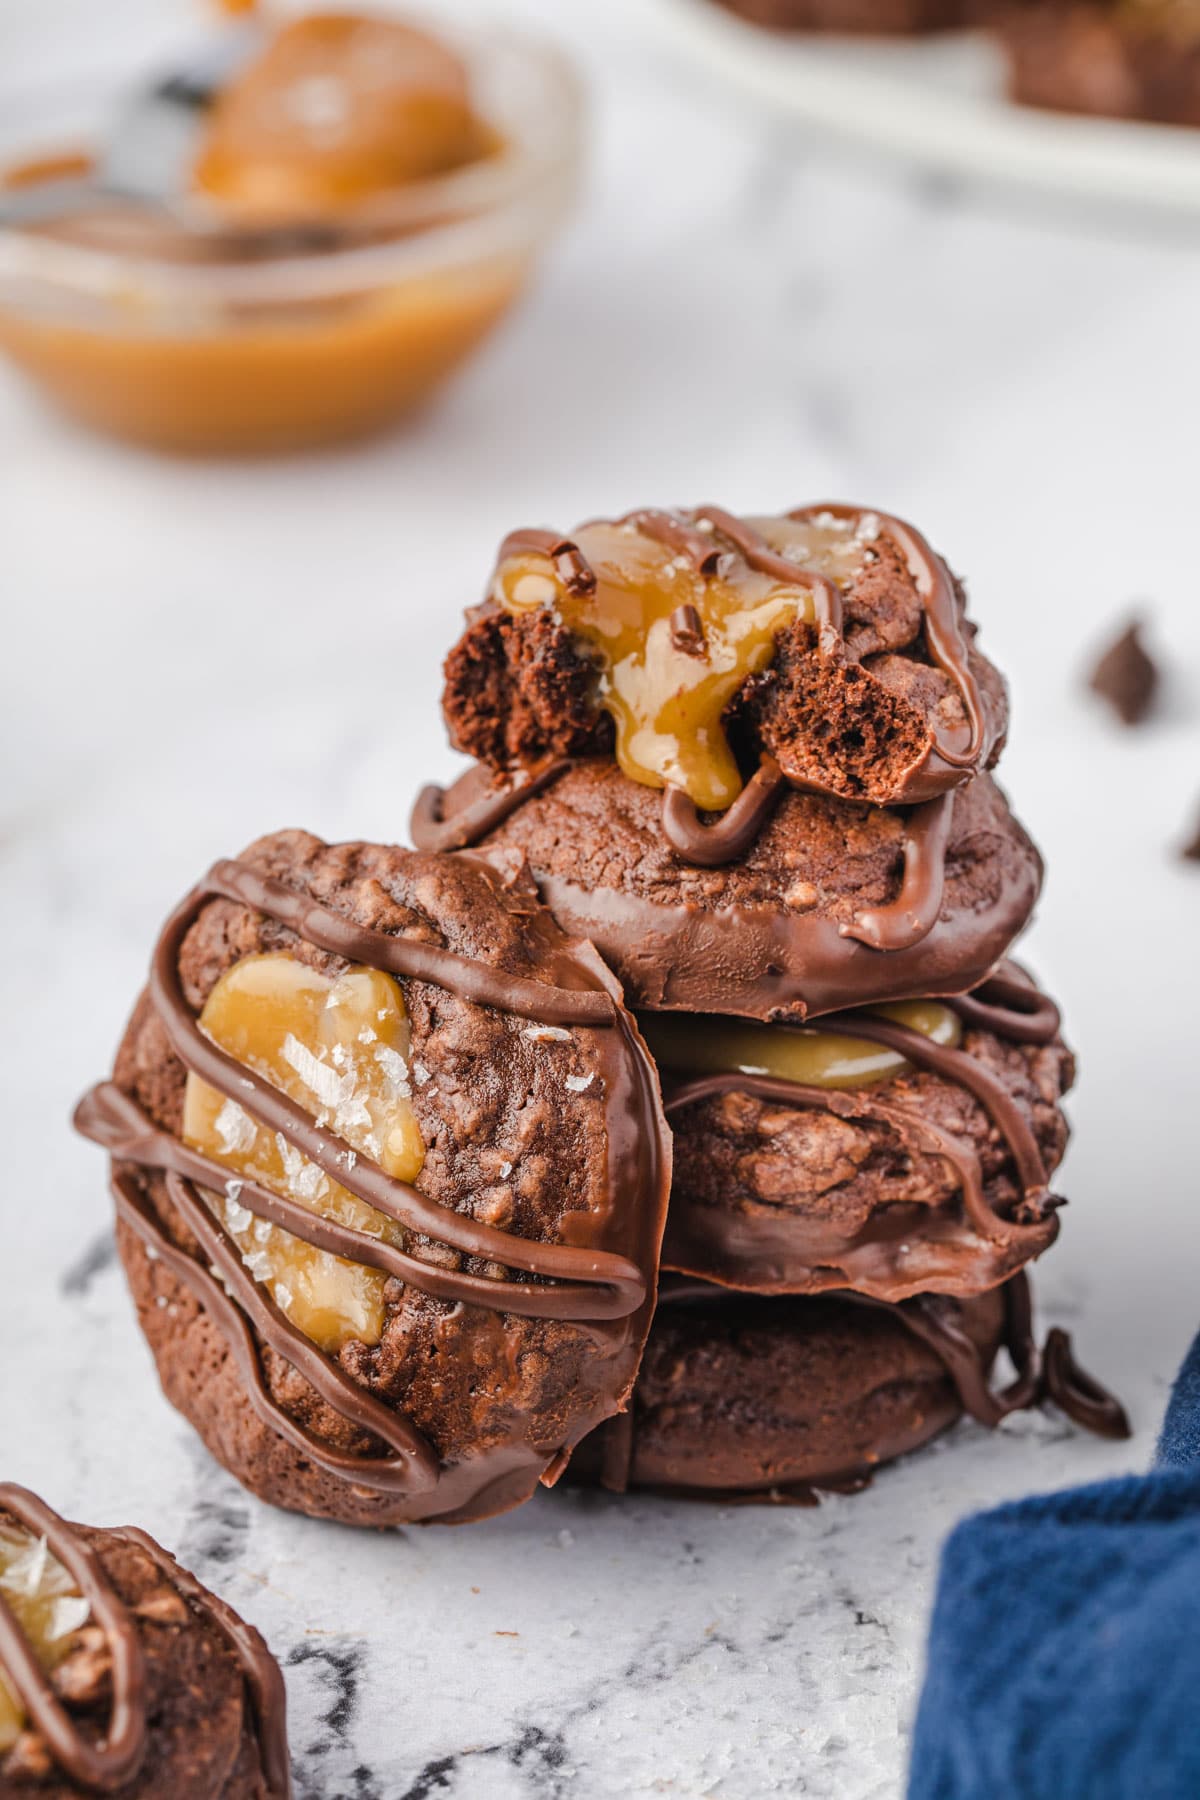 Stack of 4 caramel brownie cookies, with 1 on its side resting against the stack.